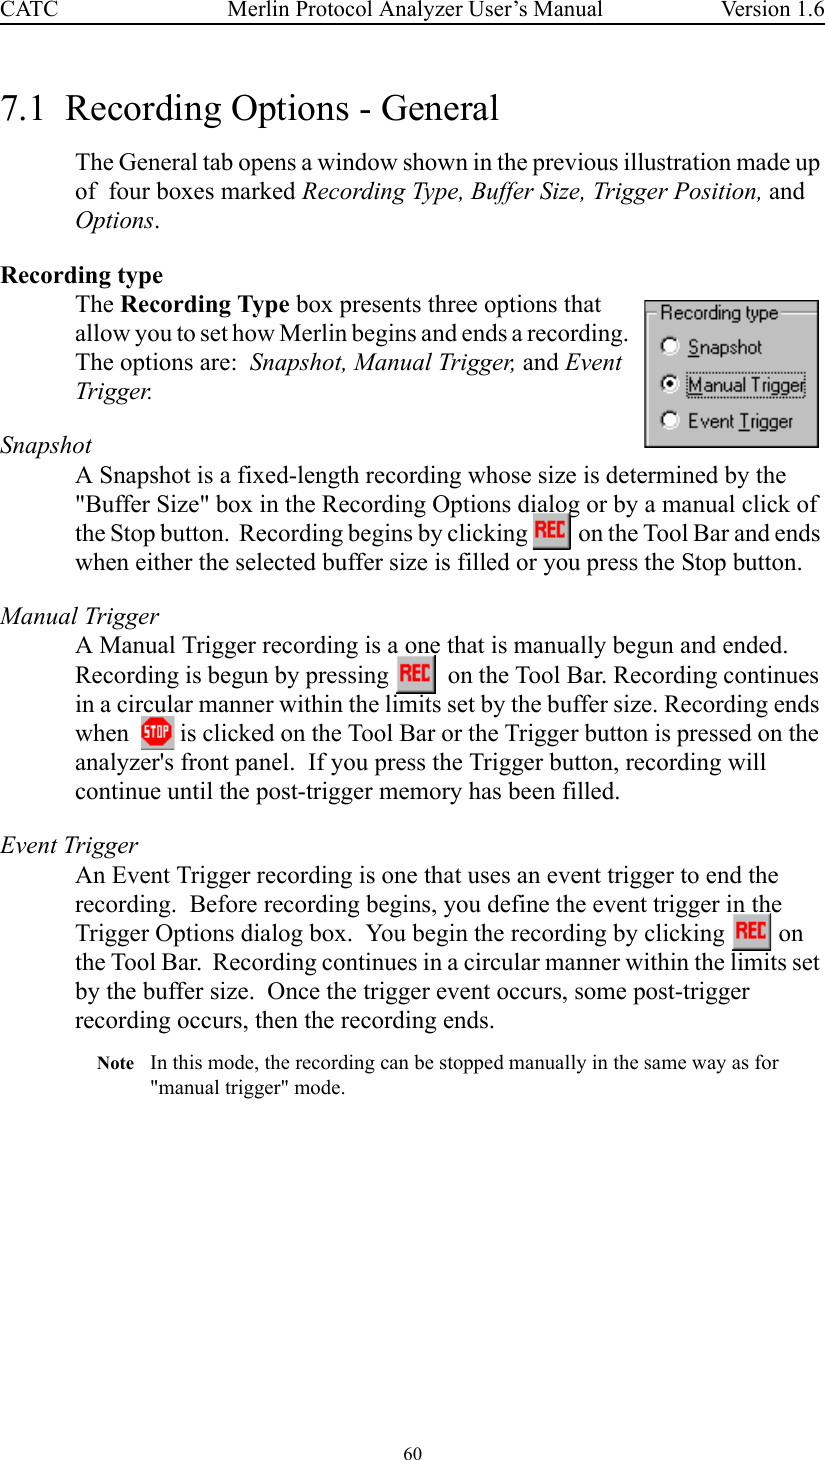 60 Merlin Protocol Analyzer User’s ManualCATC Version 1.67.1  Recording Options - GeneralThe General tab opens a window shown in the previous illustration made up of  four boxes marked Recording Type, Buffer Size, Trigger Position, and Options.Recording typeThe Recording Type box presents three options that allow you to set how Merlin begins and ends a recording.  The options are:  Snapshot, Manual Trigger, and Event Trigger.SnapshotA Snapshot is a fixed-length recording whose size is determined by the &quot;Buffer Size&quot; box in the Recording Options dialog or by a manual click of the Stop button.  Recording begins by clicking   on the Tool Bar and ends when either the selected buffer size is filled or you press the Stop button.  Manual TriggerA Manual Trigger recording is a one that is manually begun and ended.  Recording is begun by pressing    on the Tool Bar. Recording continues in a circular manner within the limits set by the buffer size. Recording ends when    is clicked on the Tool Bar or the Trigger button is pressed on the analyzer&apos;s front panel.  If you press the Trigger button, recording will continue until the post-trigger memory has been filled.Event TriggerAn Event Trigger recording is one that uses an event trigger to end the recording.  Before recording begins, you define the event trigger in the Trigger Options dialog box.  You begin the recording by clicking   on the Tool Bar.  Recording continues in a circular manner within the limits set by the buffer size.  Once the trigger event occurs, some post-trigger recording occurs, then the recording ends.Note In this mode, the recording can be stopped manually in the same way as for &quot;manual trigger&quot; mode.